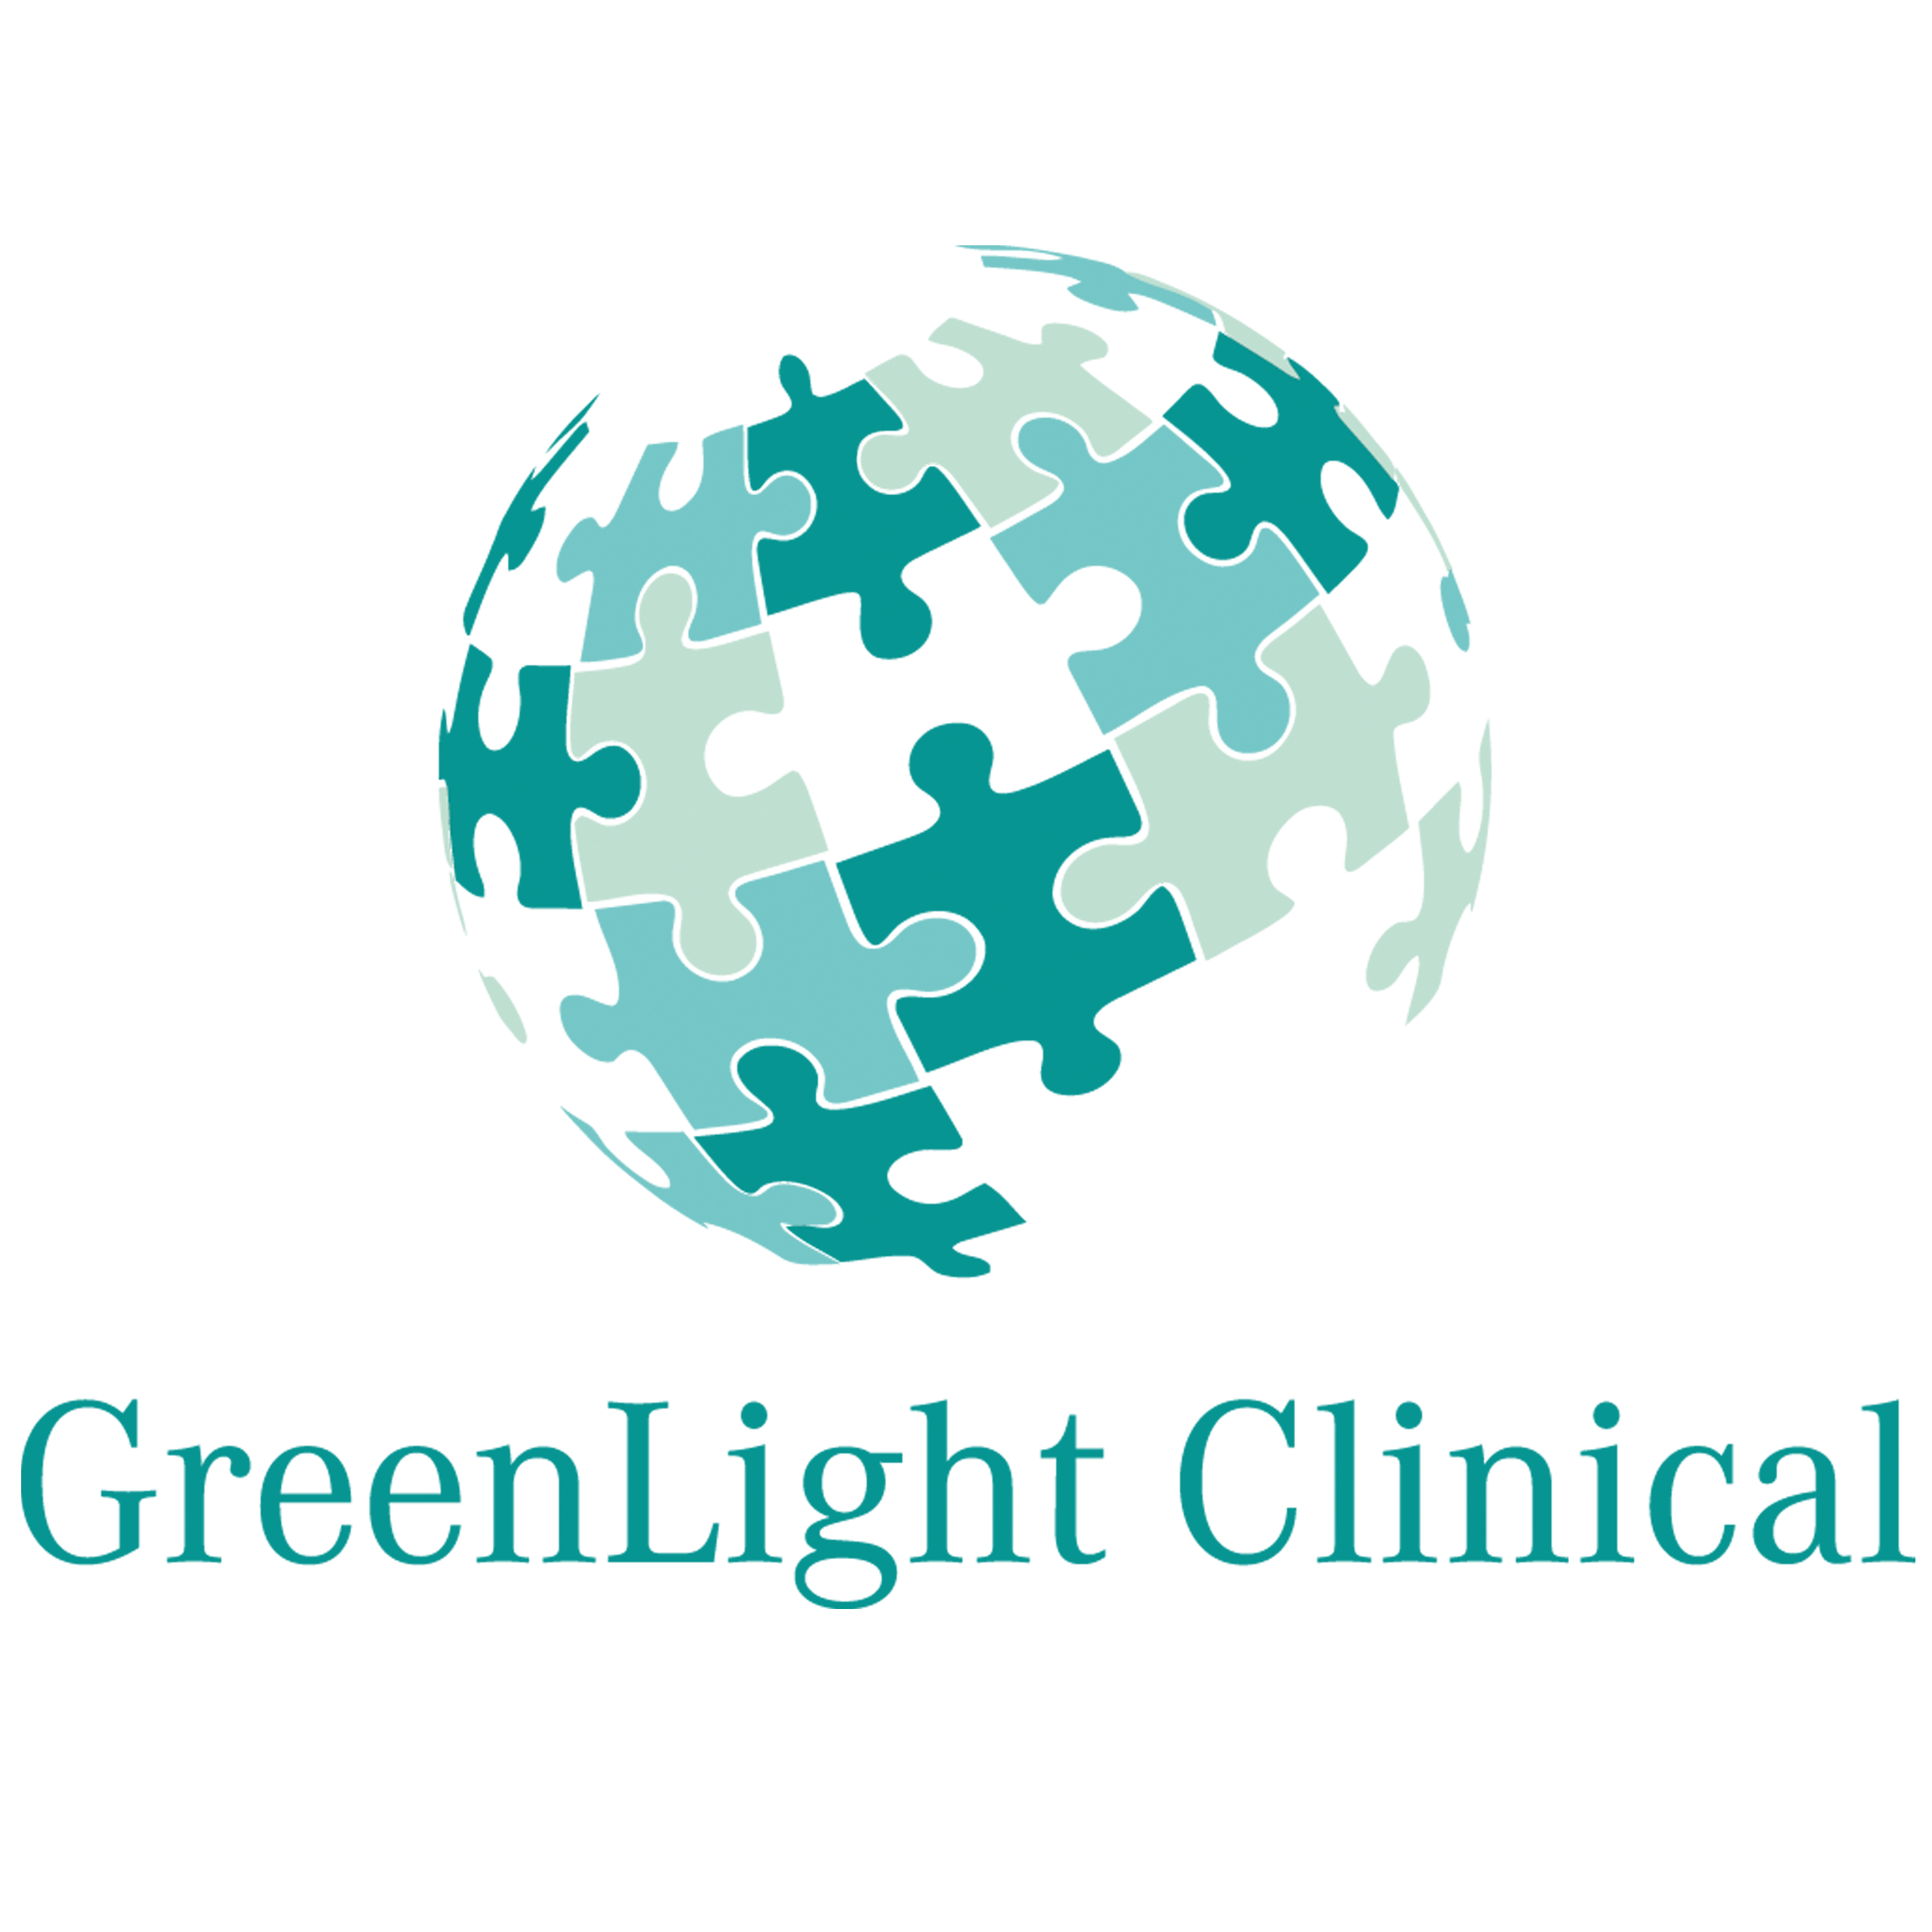 GreenLight Clinical